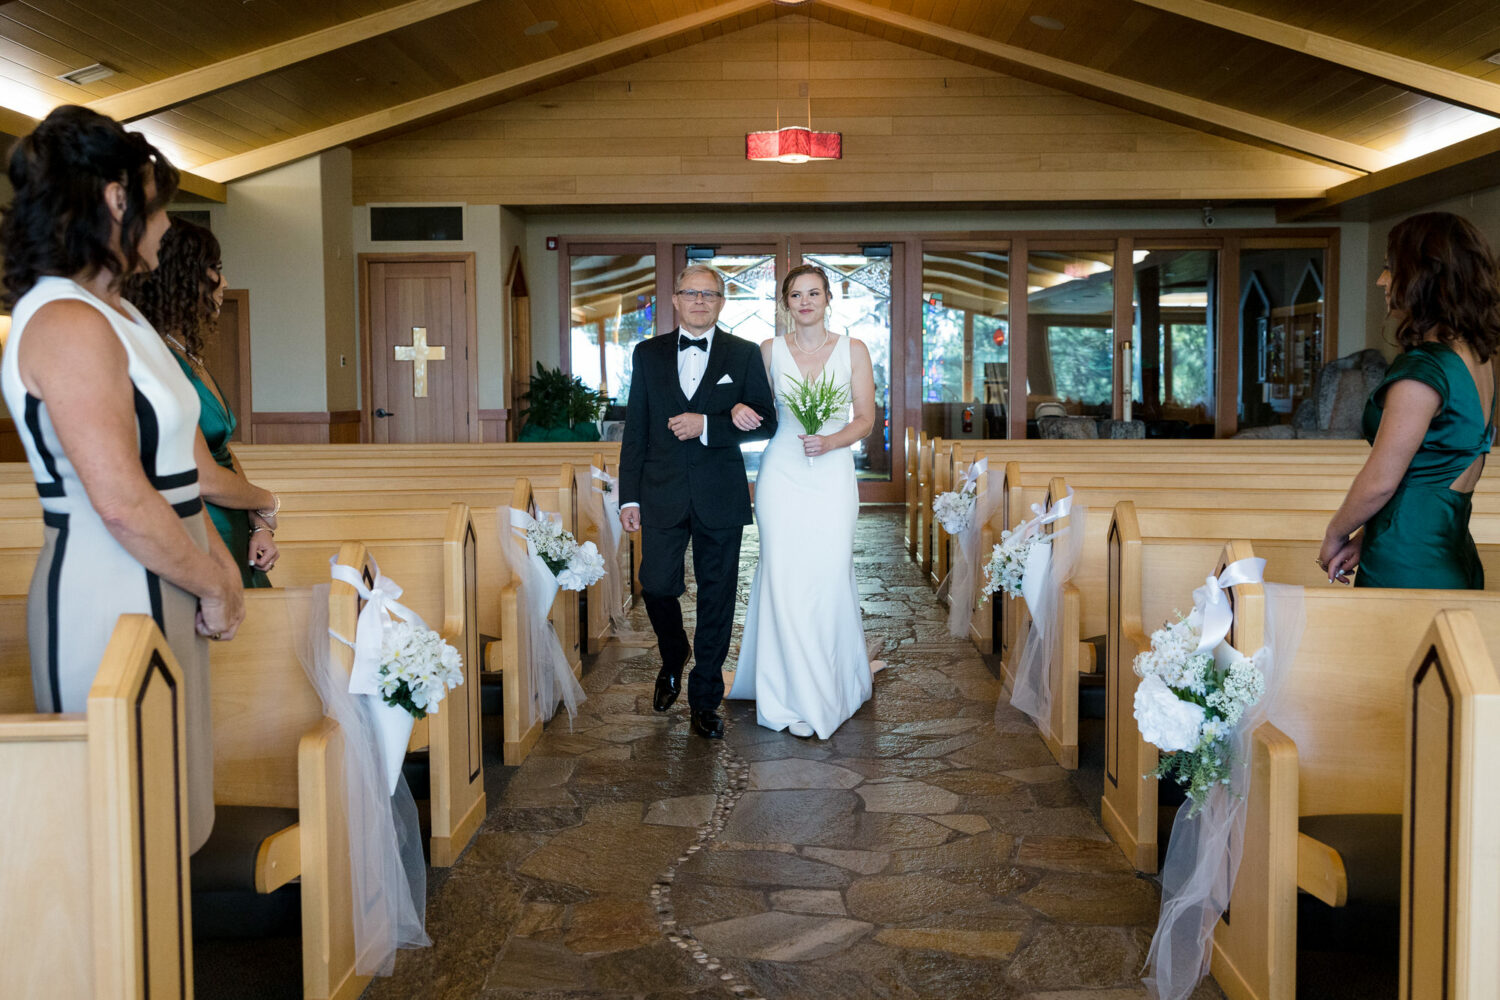 The bride and her father walk past DIY church pew decorations with white flowers.